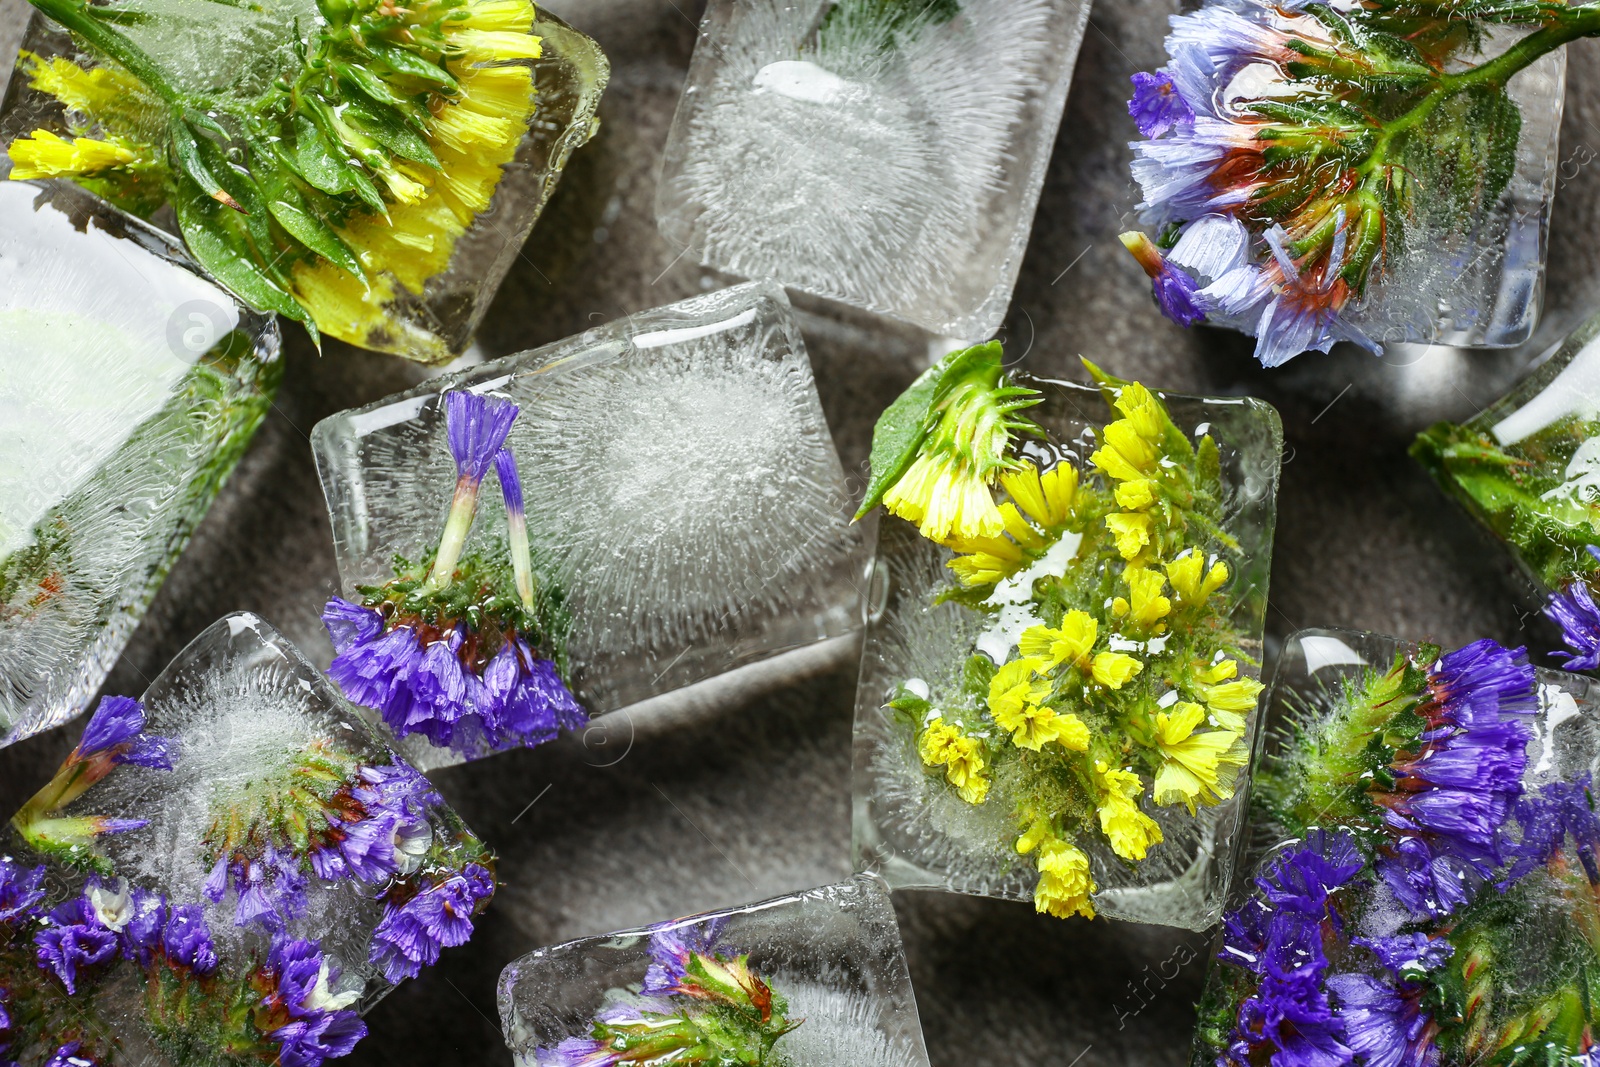 Photo of Ice cubes with flowers on grey stone background, flat lay